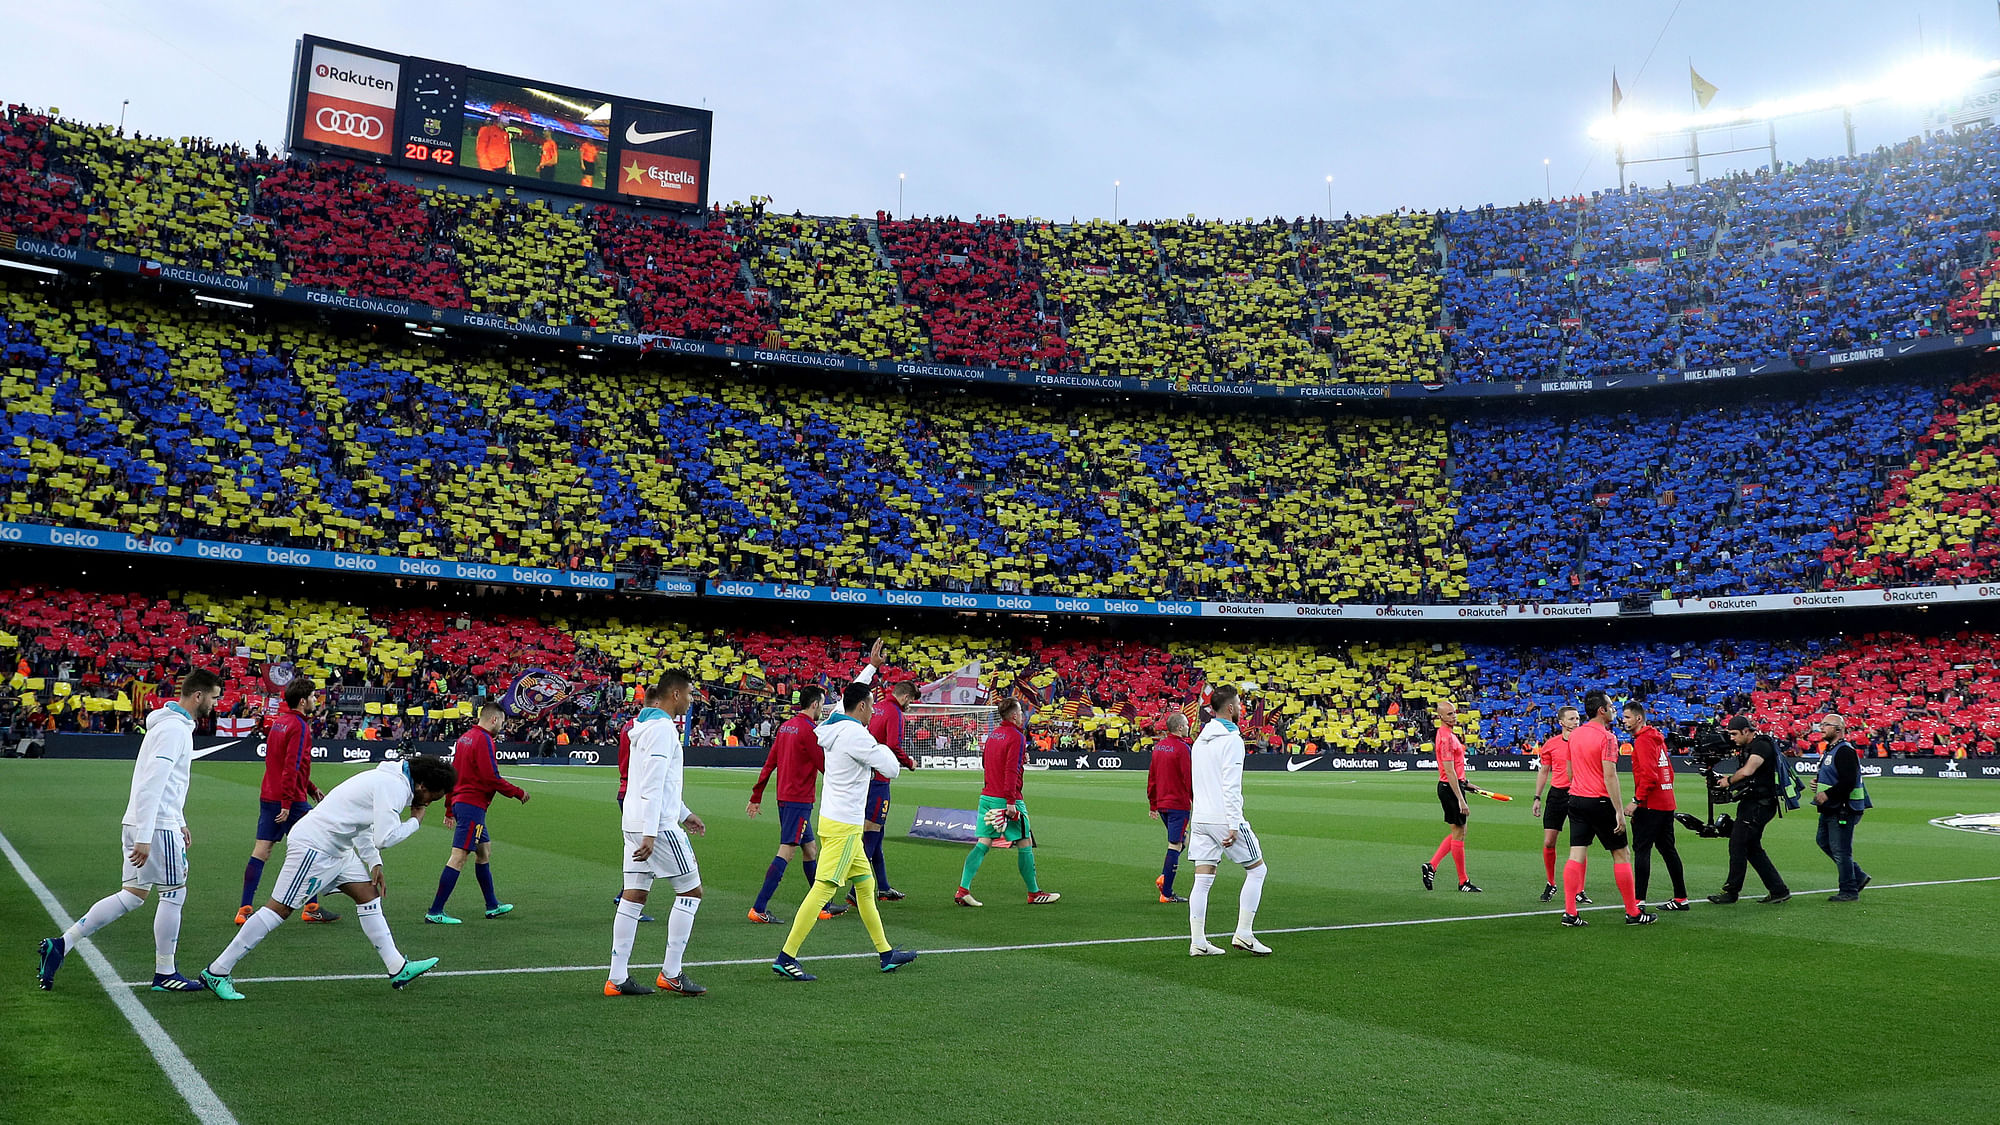 The Real Madrid and Barcelona players enter the field as the fans are ready with their message at Camp Nou.